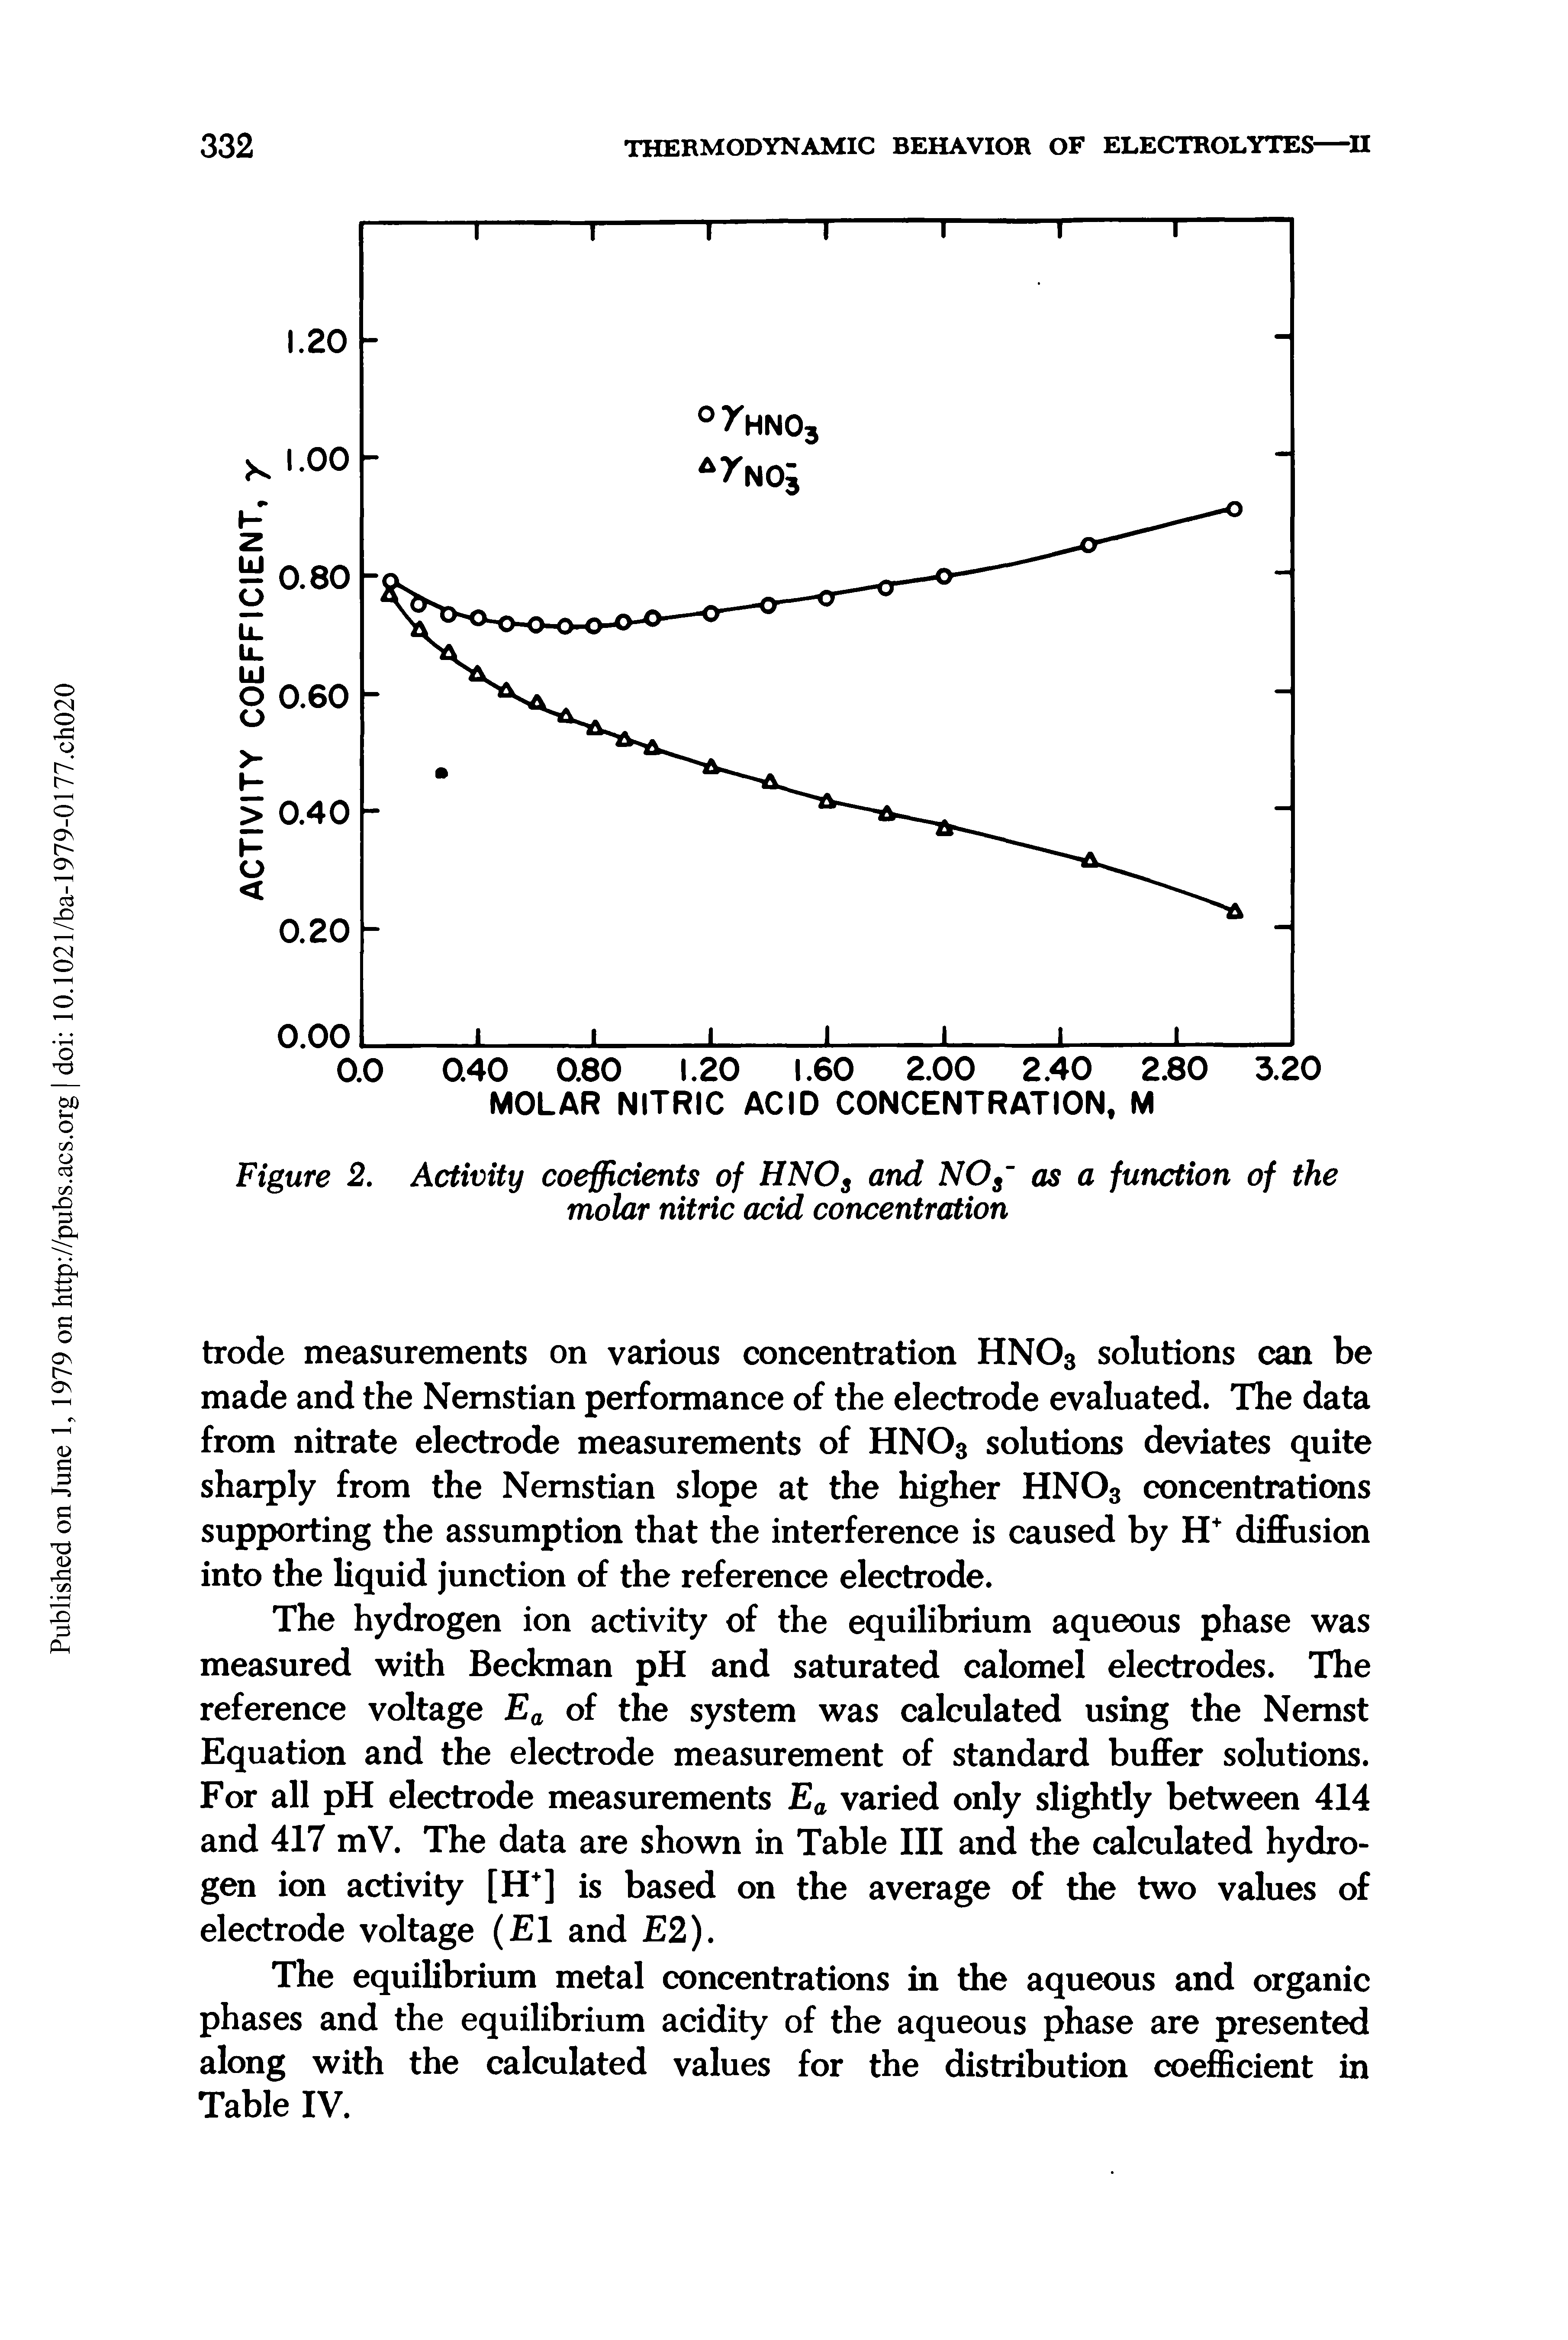 Figure 2. Activity coefficients of HNOs and NOs as a function of the molar nitric acid concentration...